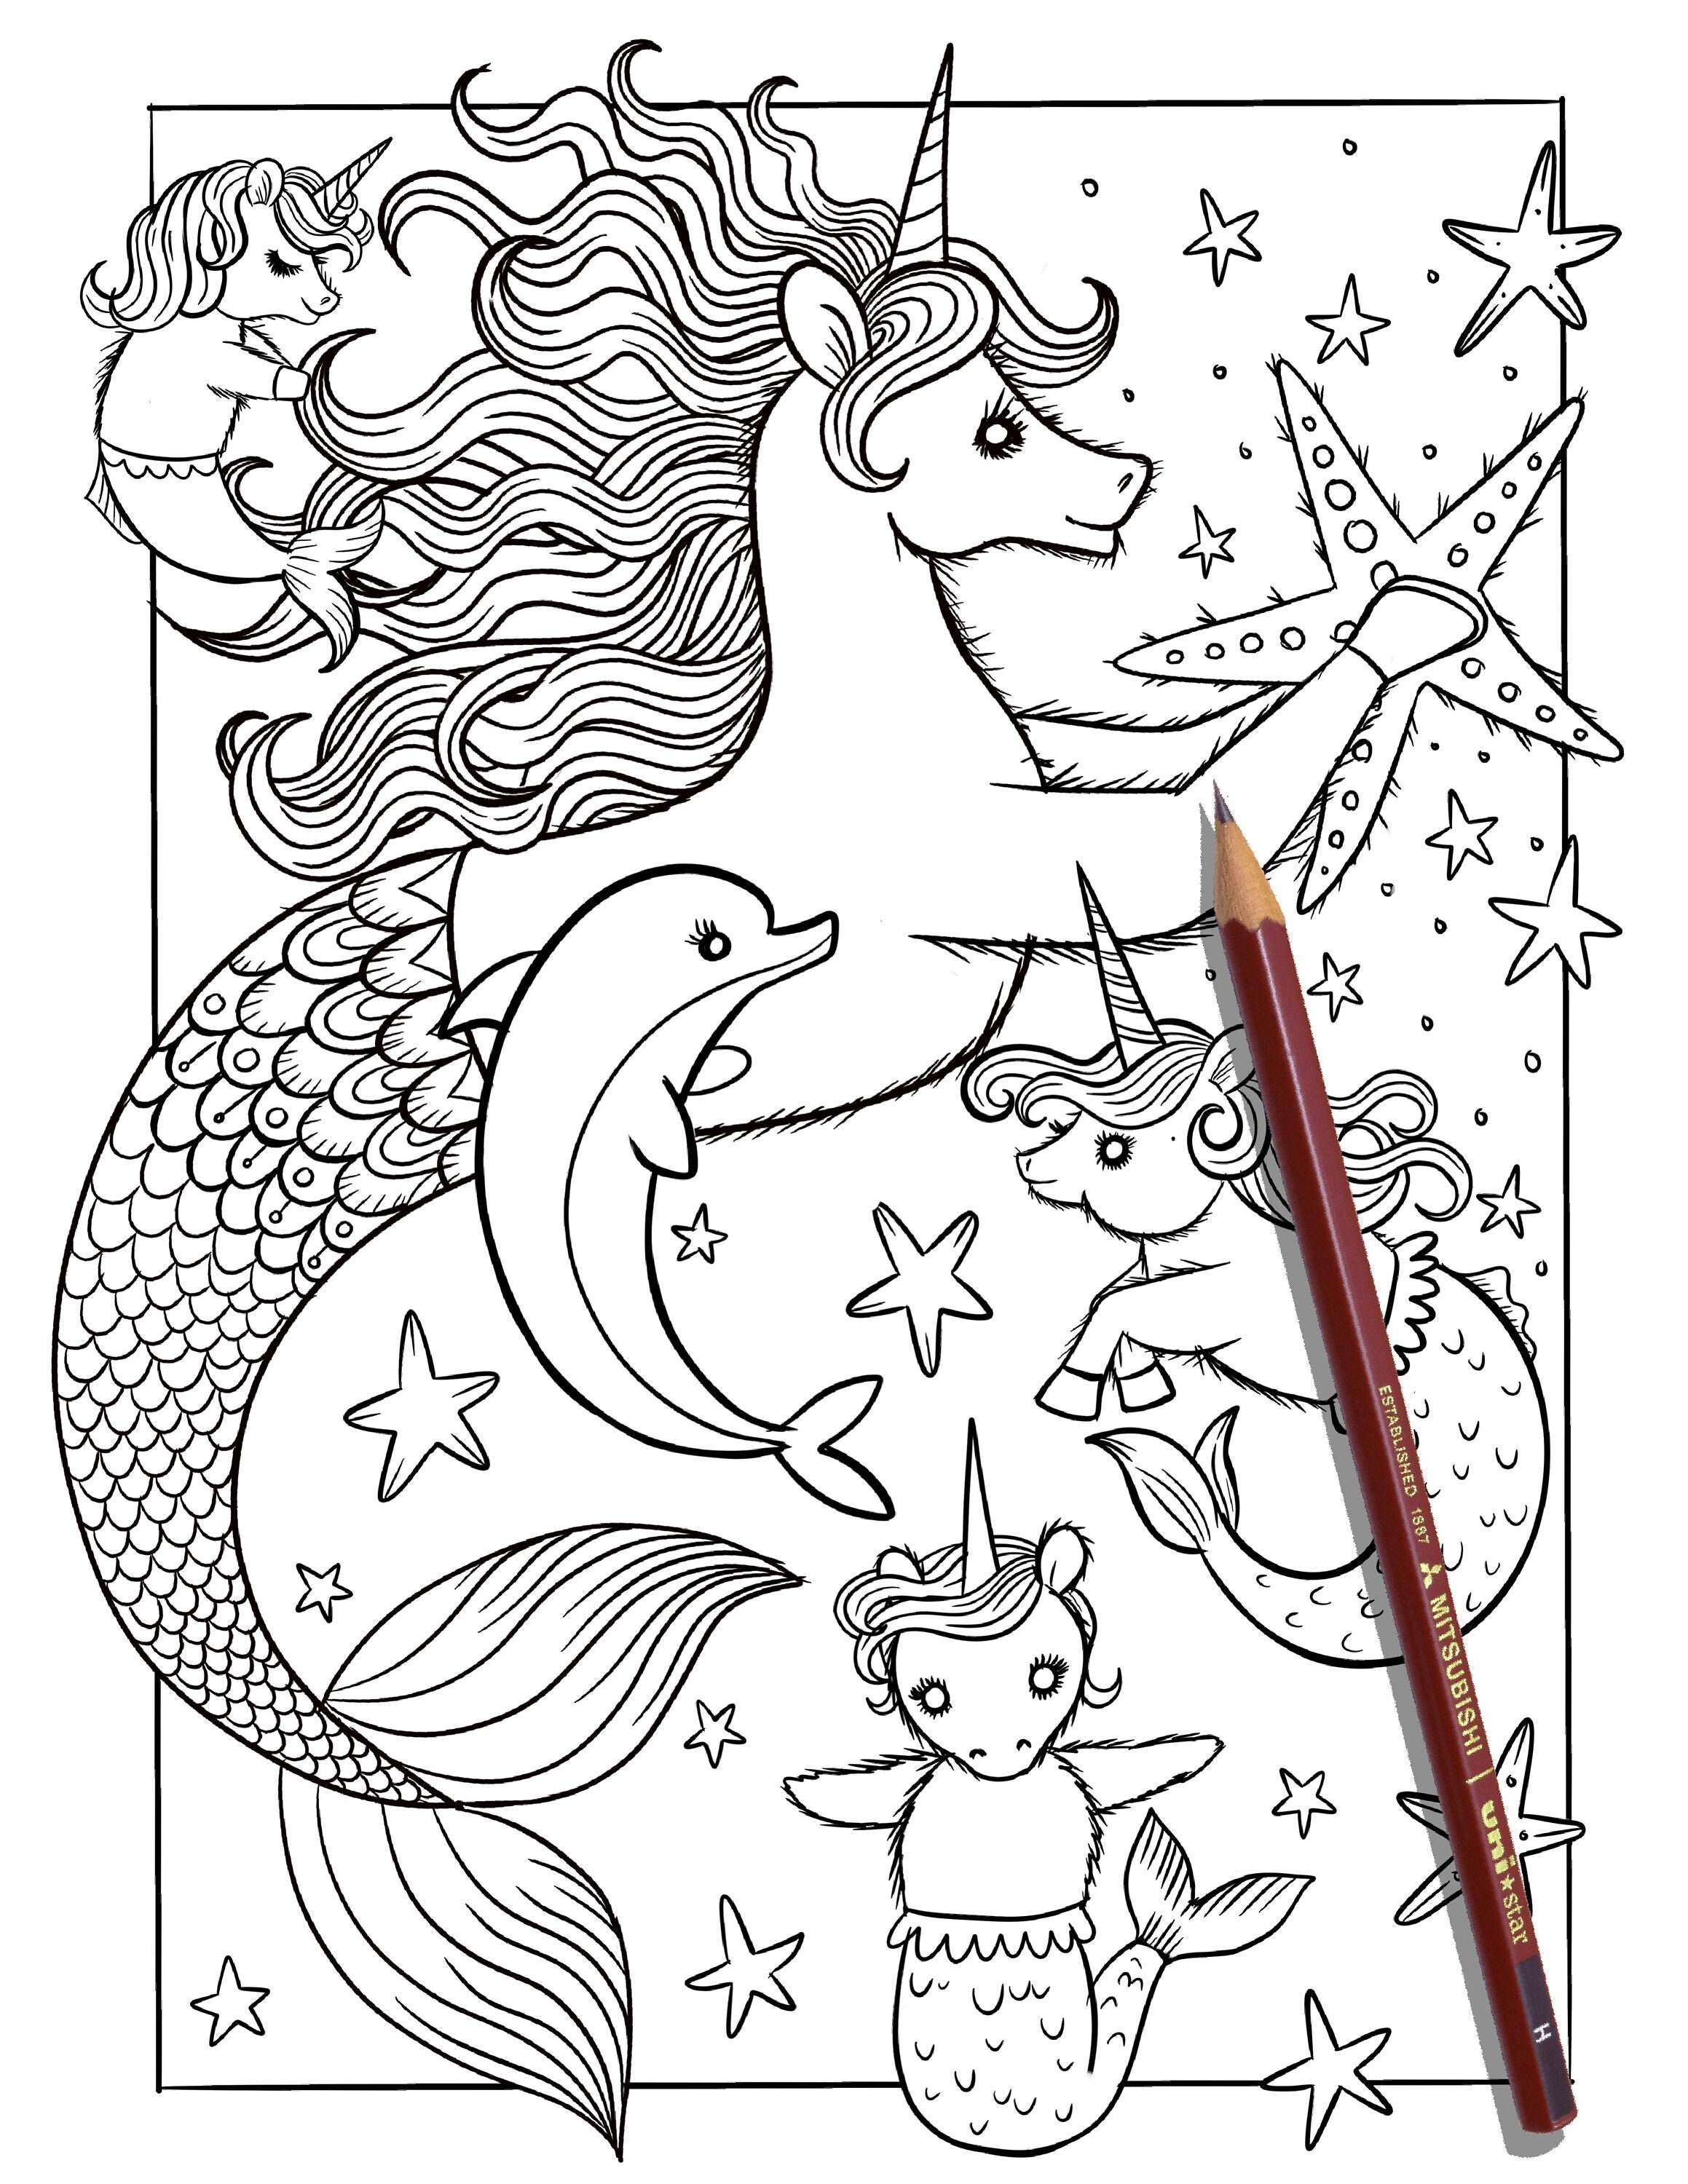 Cute Unicorn Coloring Pages for Kids Graphic by MyCreativeLife